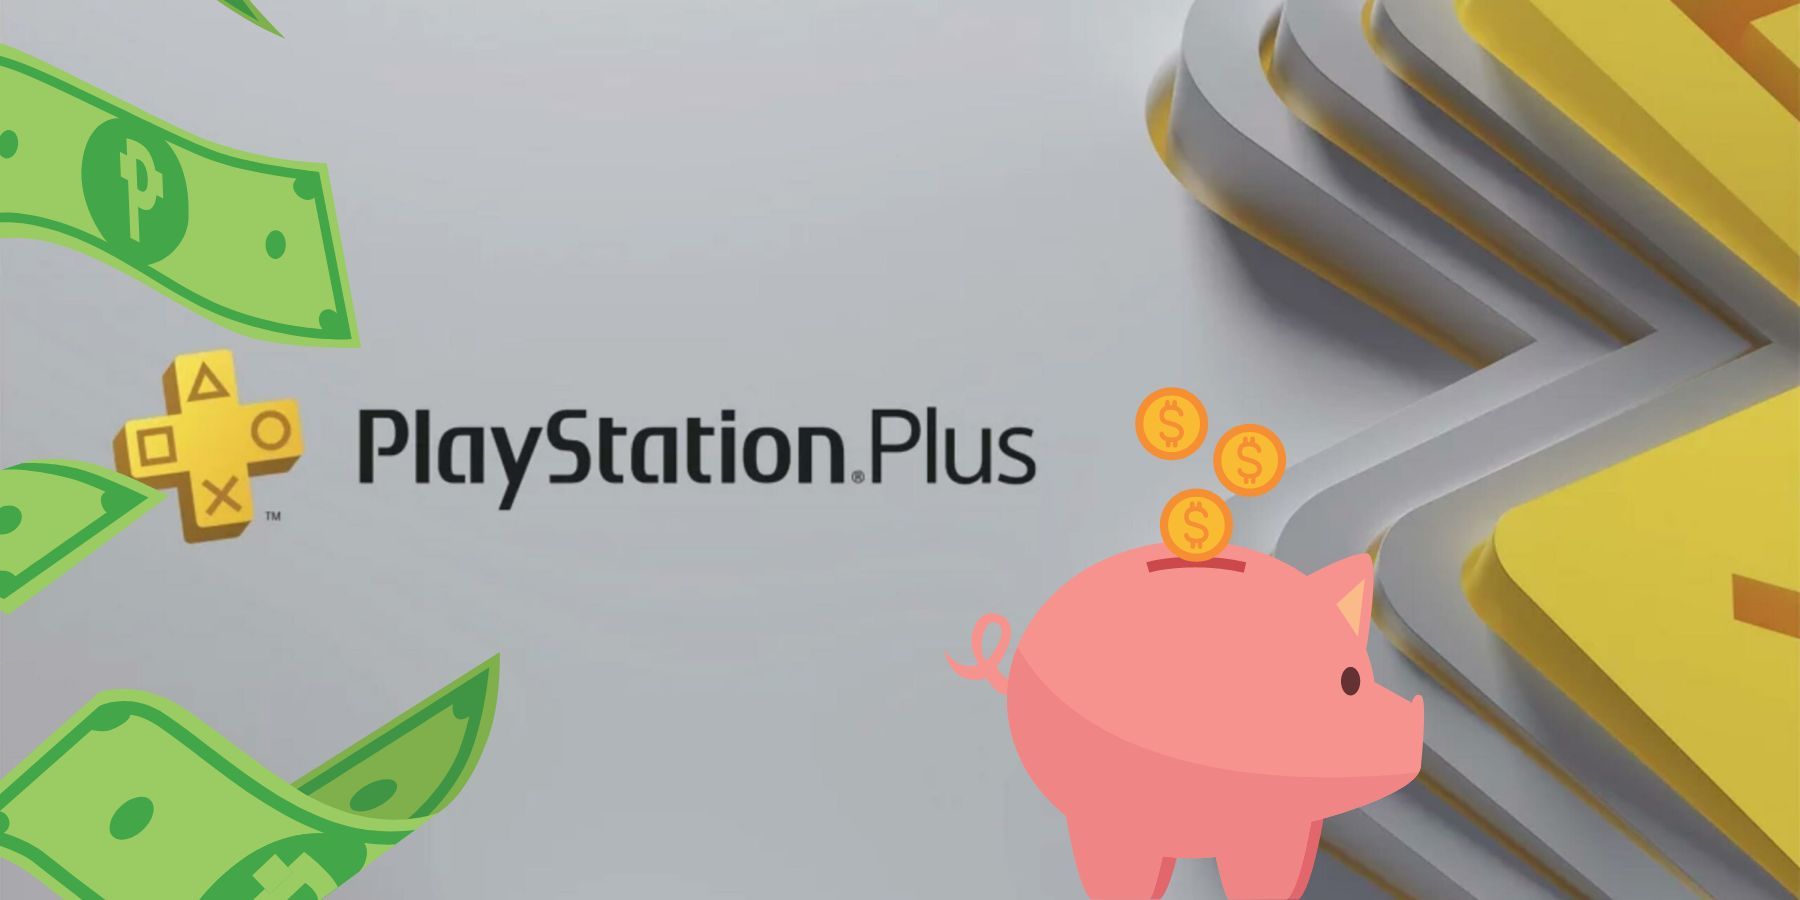 PlayStation Plus pro-rated upgrade fees: Here's how much they cost